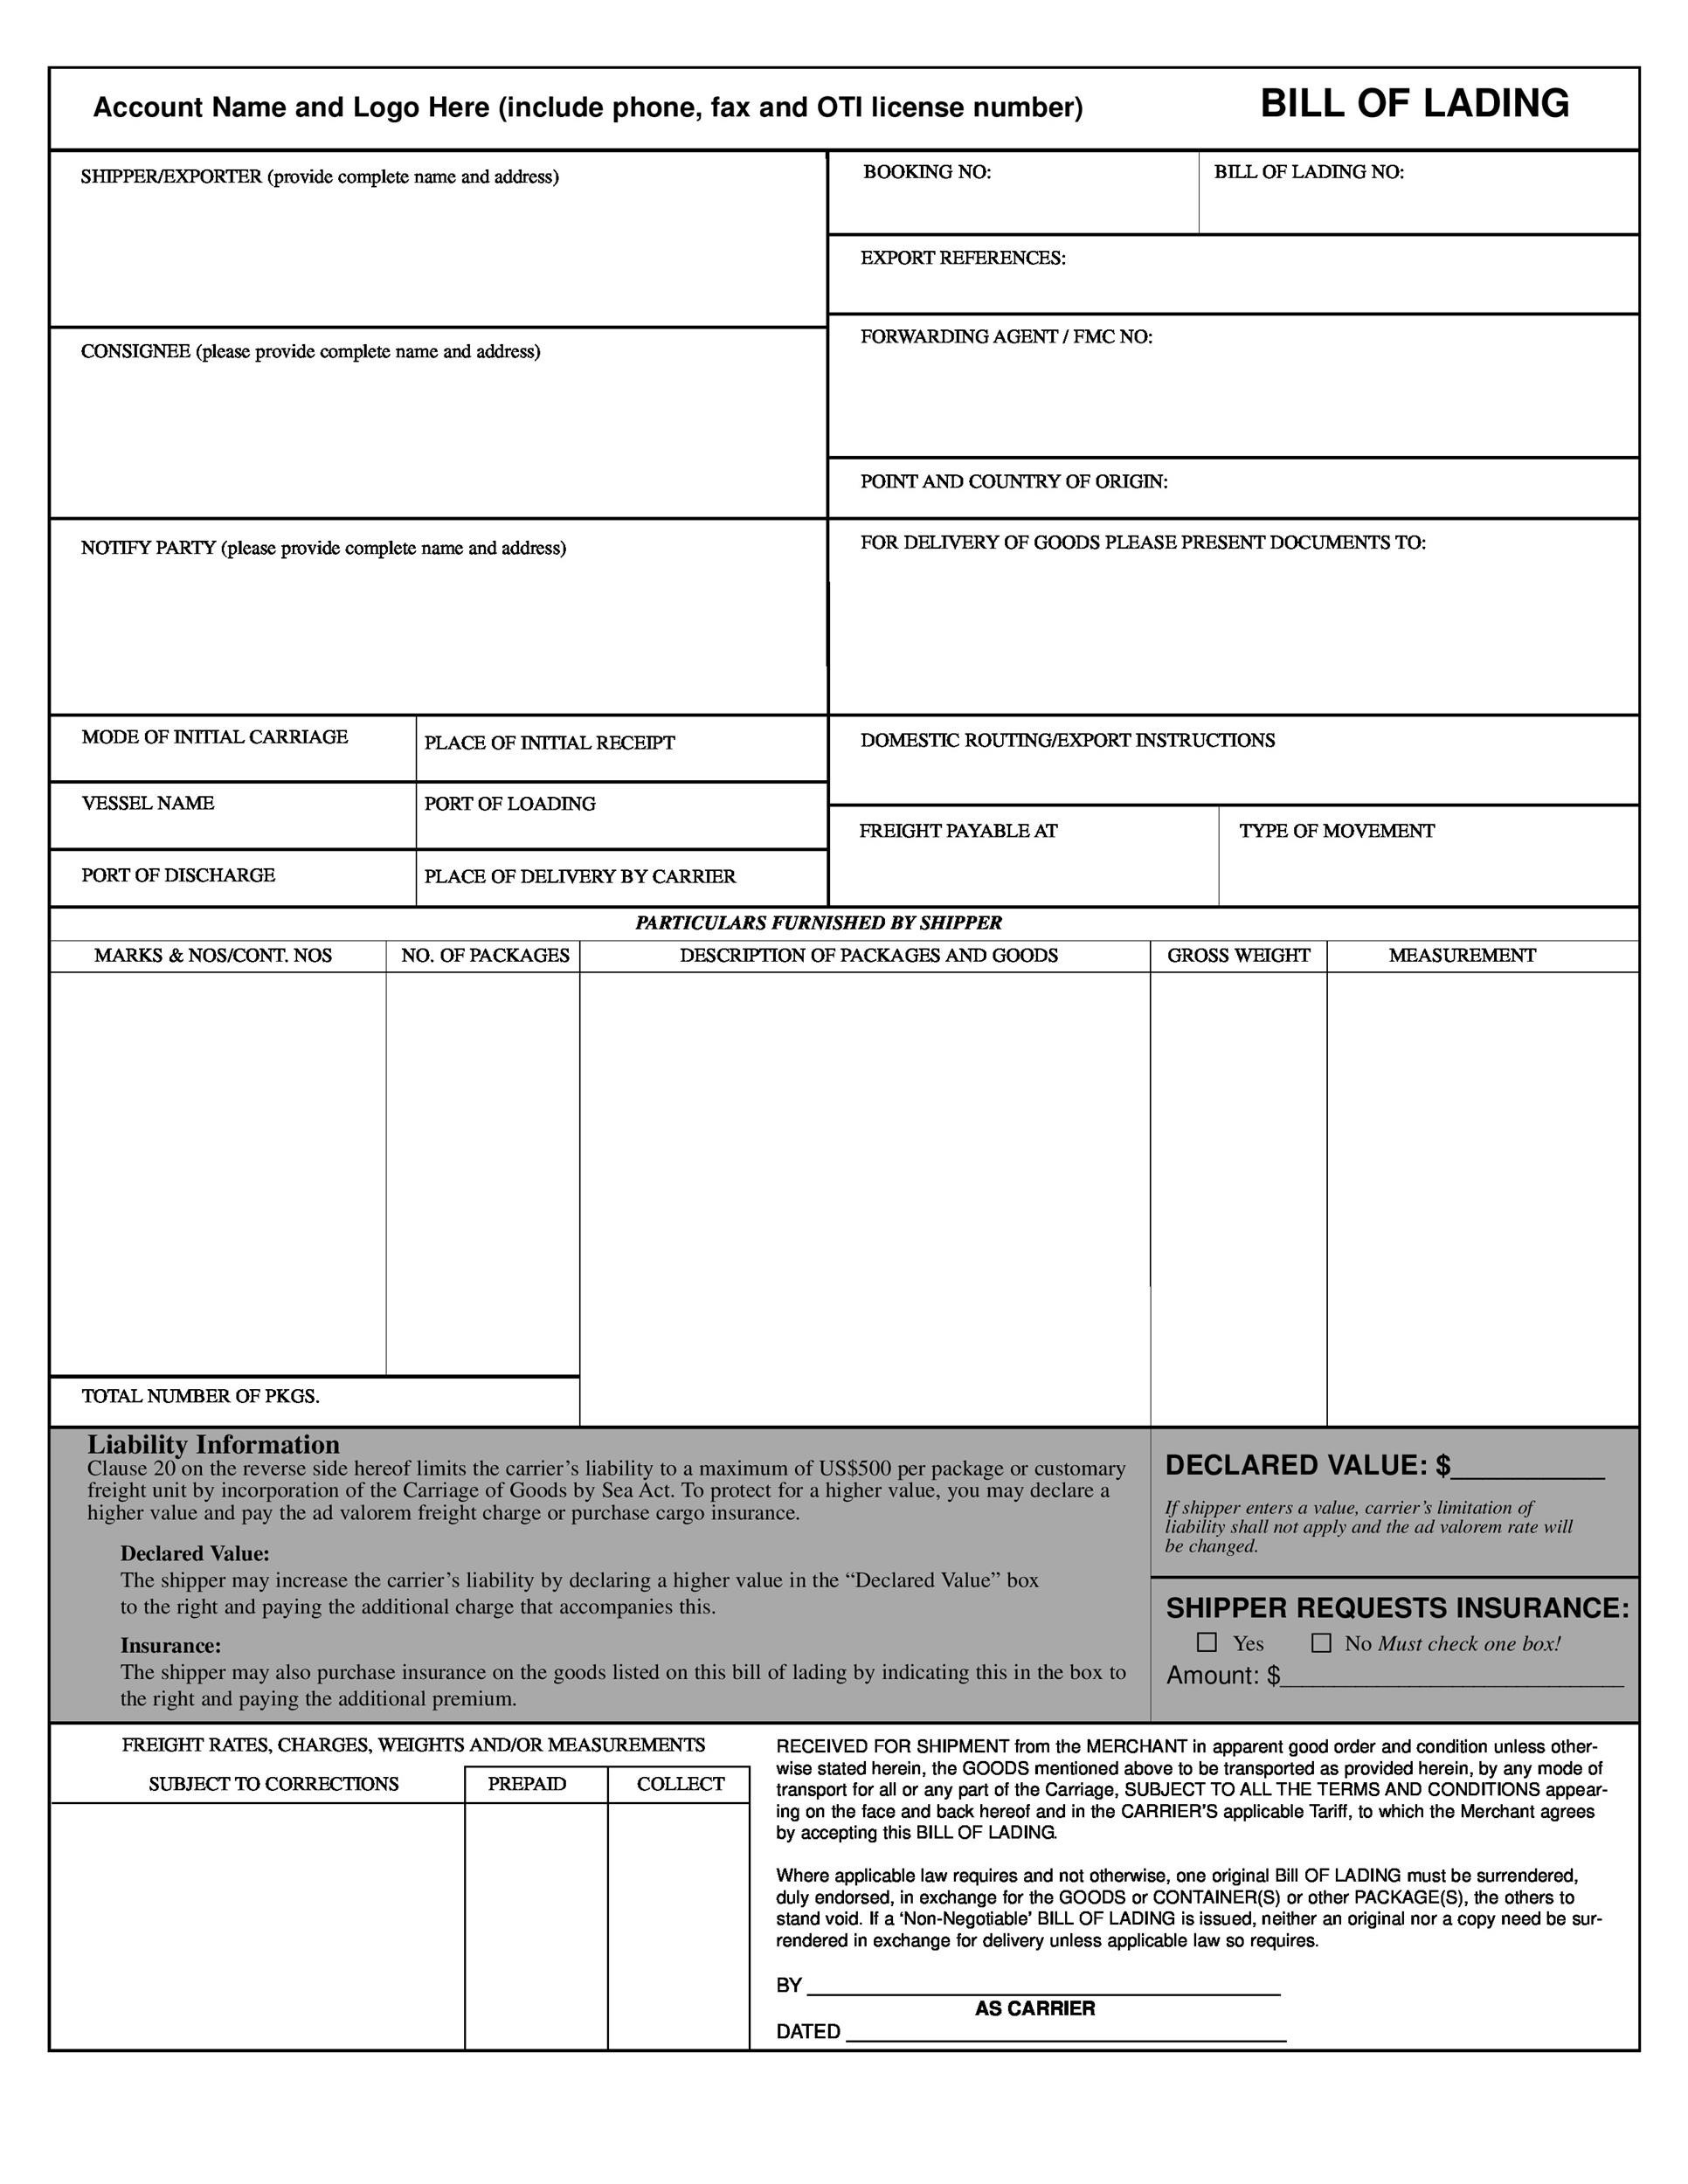 40 Free Bill of Lading Forms & Templates Template Lab